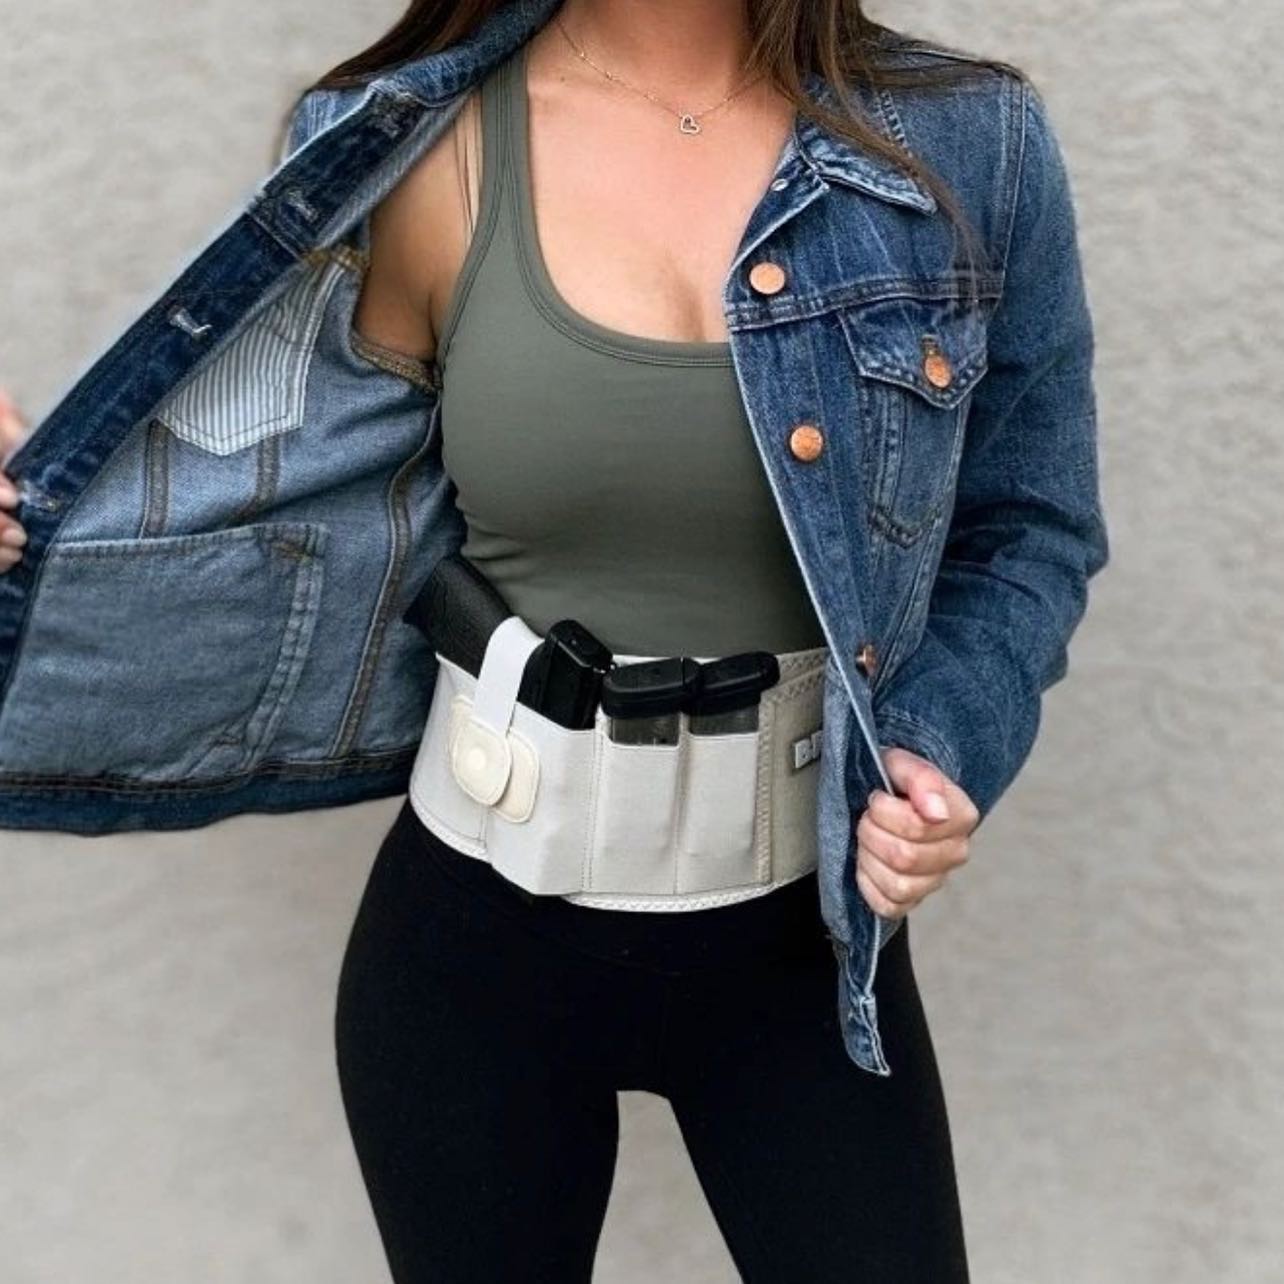 Concealed Carry Clothes For Women — Elegant Armed, 52% OFF